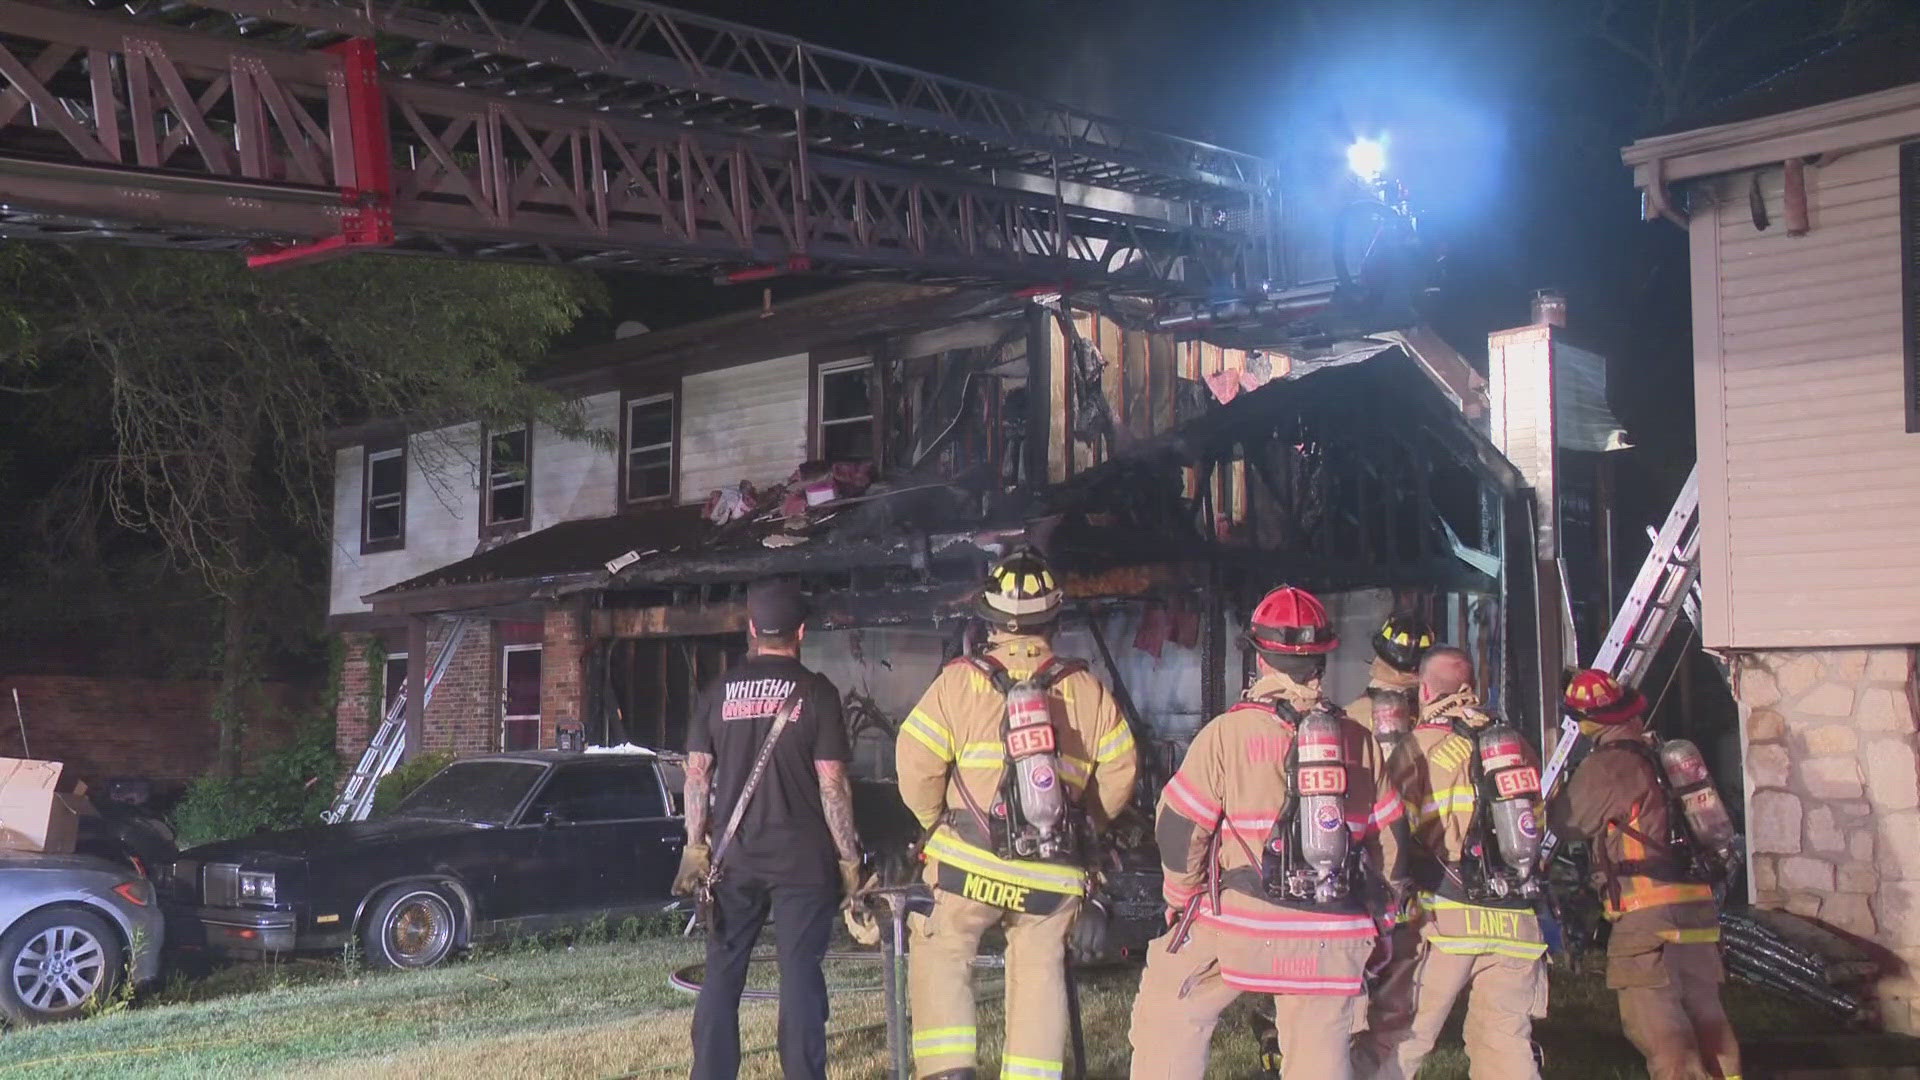 A family was displaced early Friday morning after a fire broke out at their Reynoldsburg home.